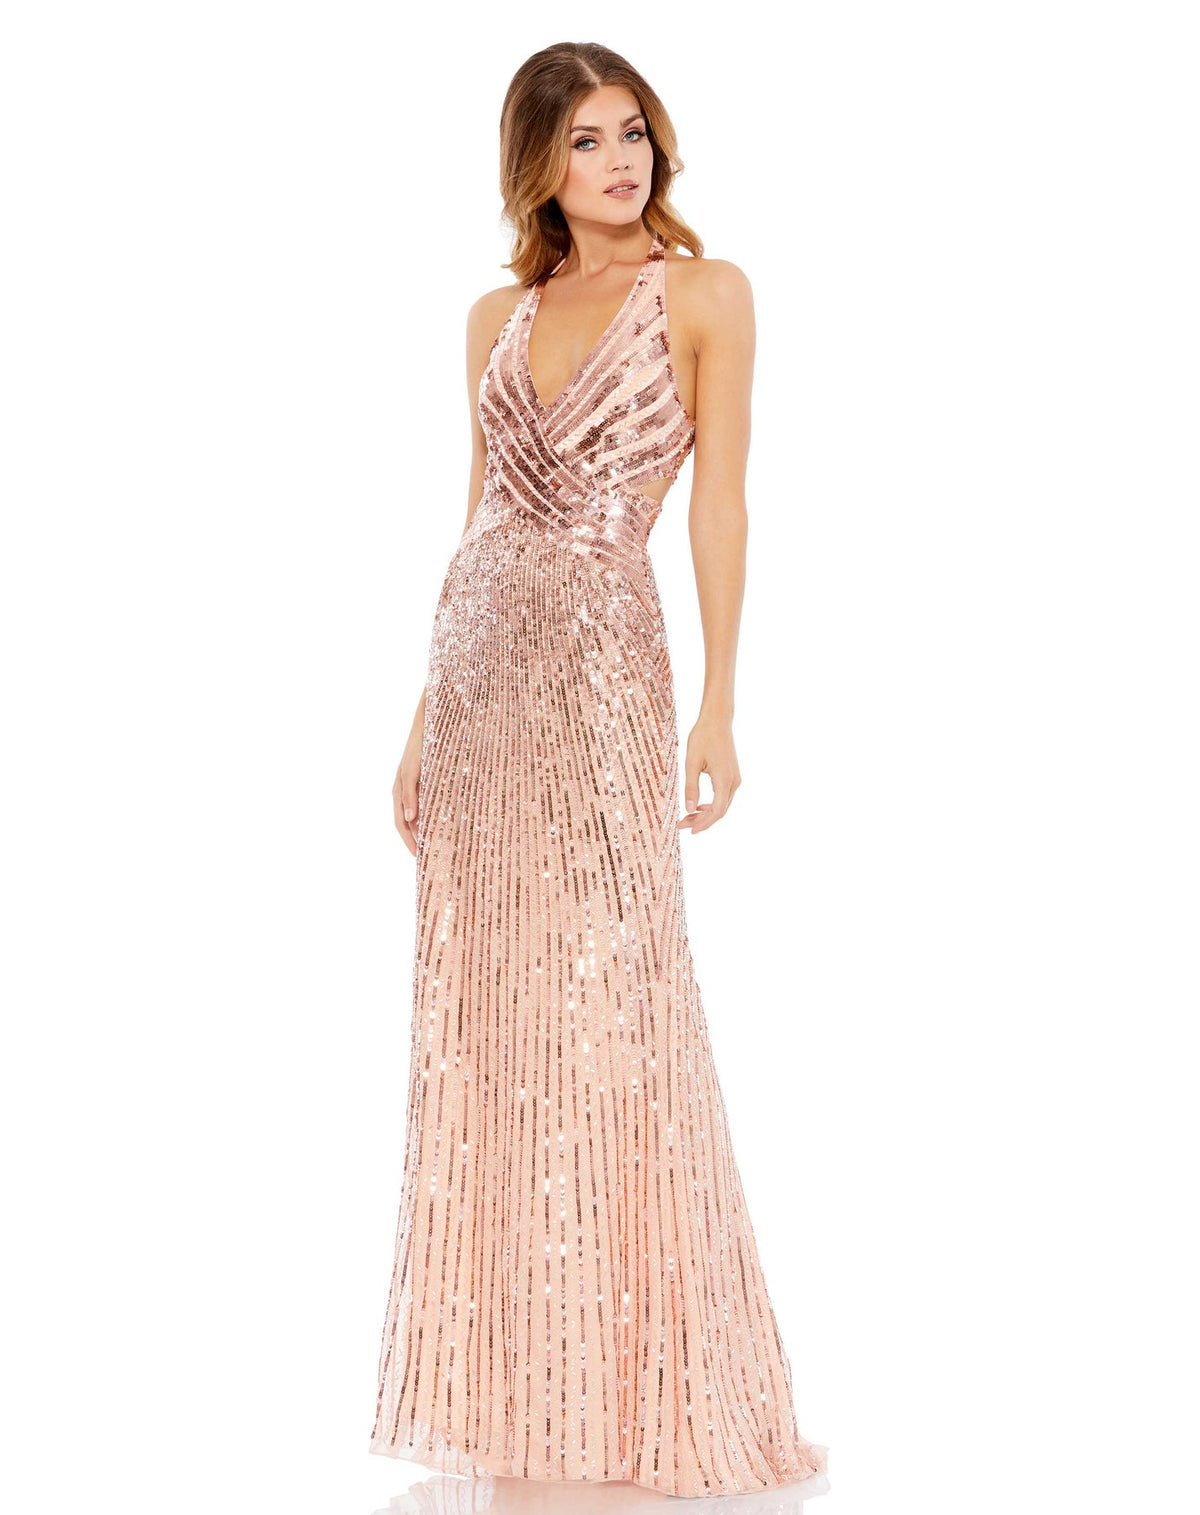 Mac Duggal, Sleeveless plunge V neck cut out evening dress - Rose Gold, Style #5390